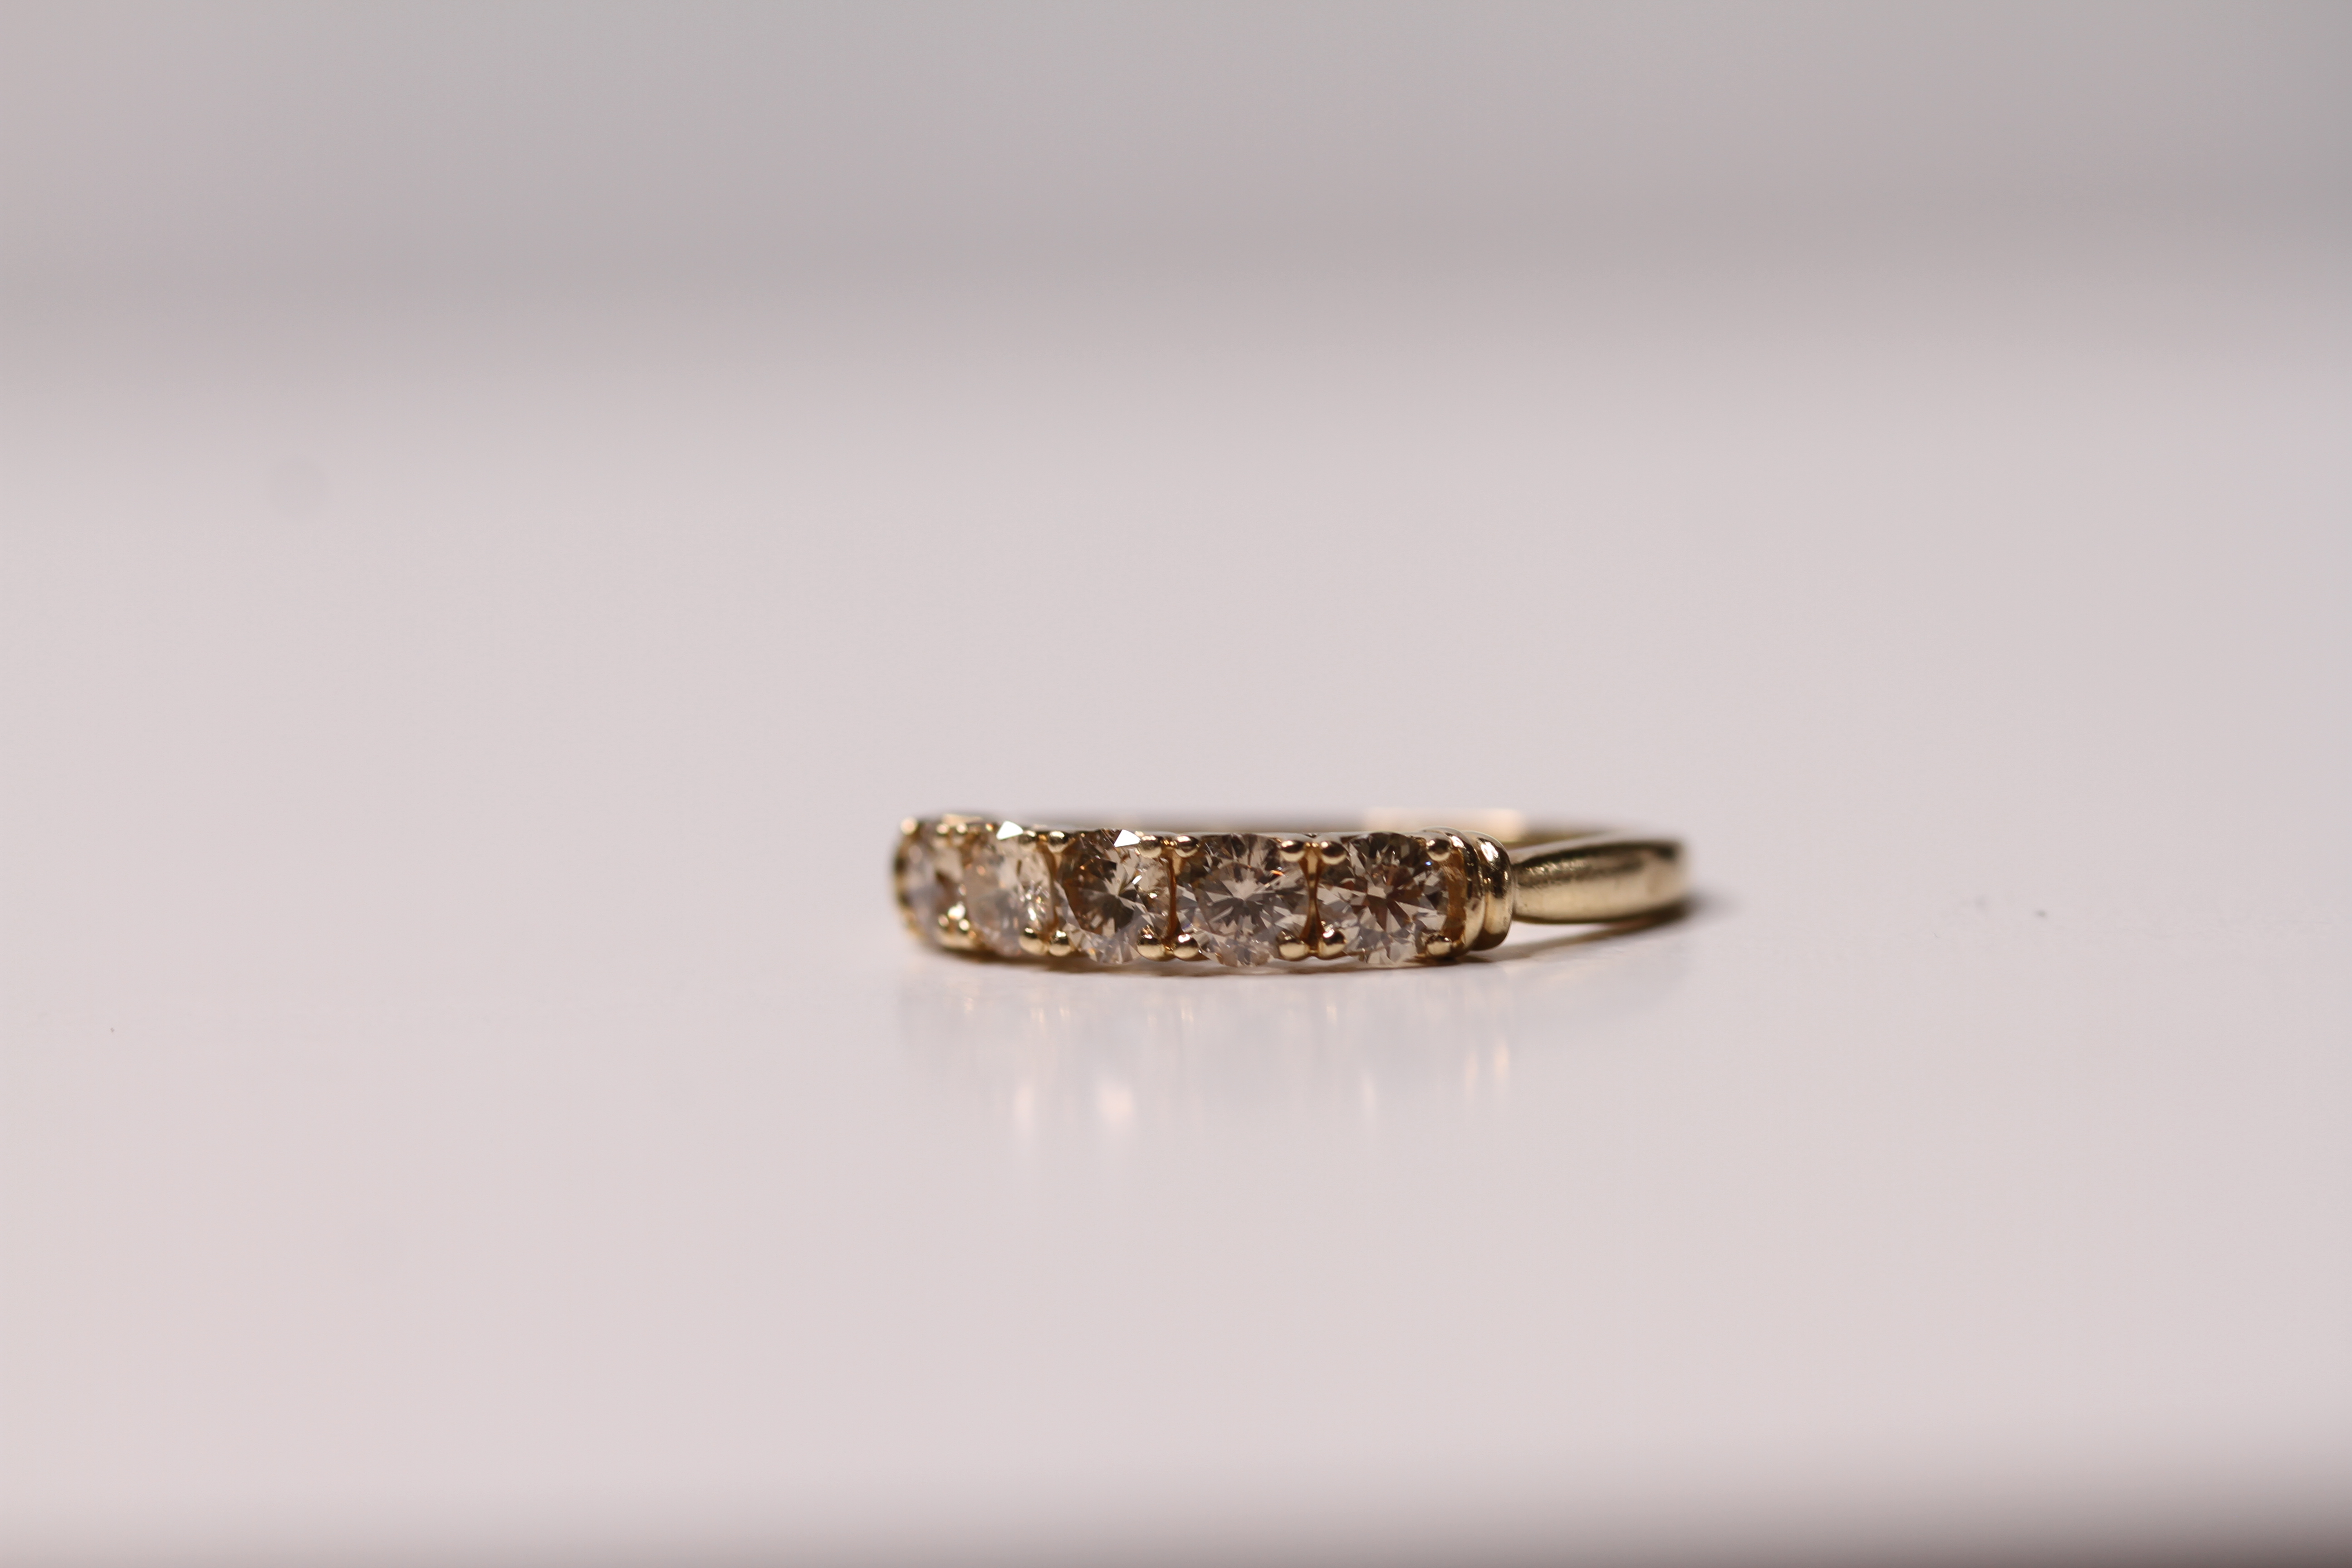 *TO BE SOLD WITHOUT RESERVE*A 14ct gold set ring with 5 brilliant cut diamonds